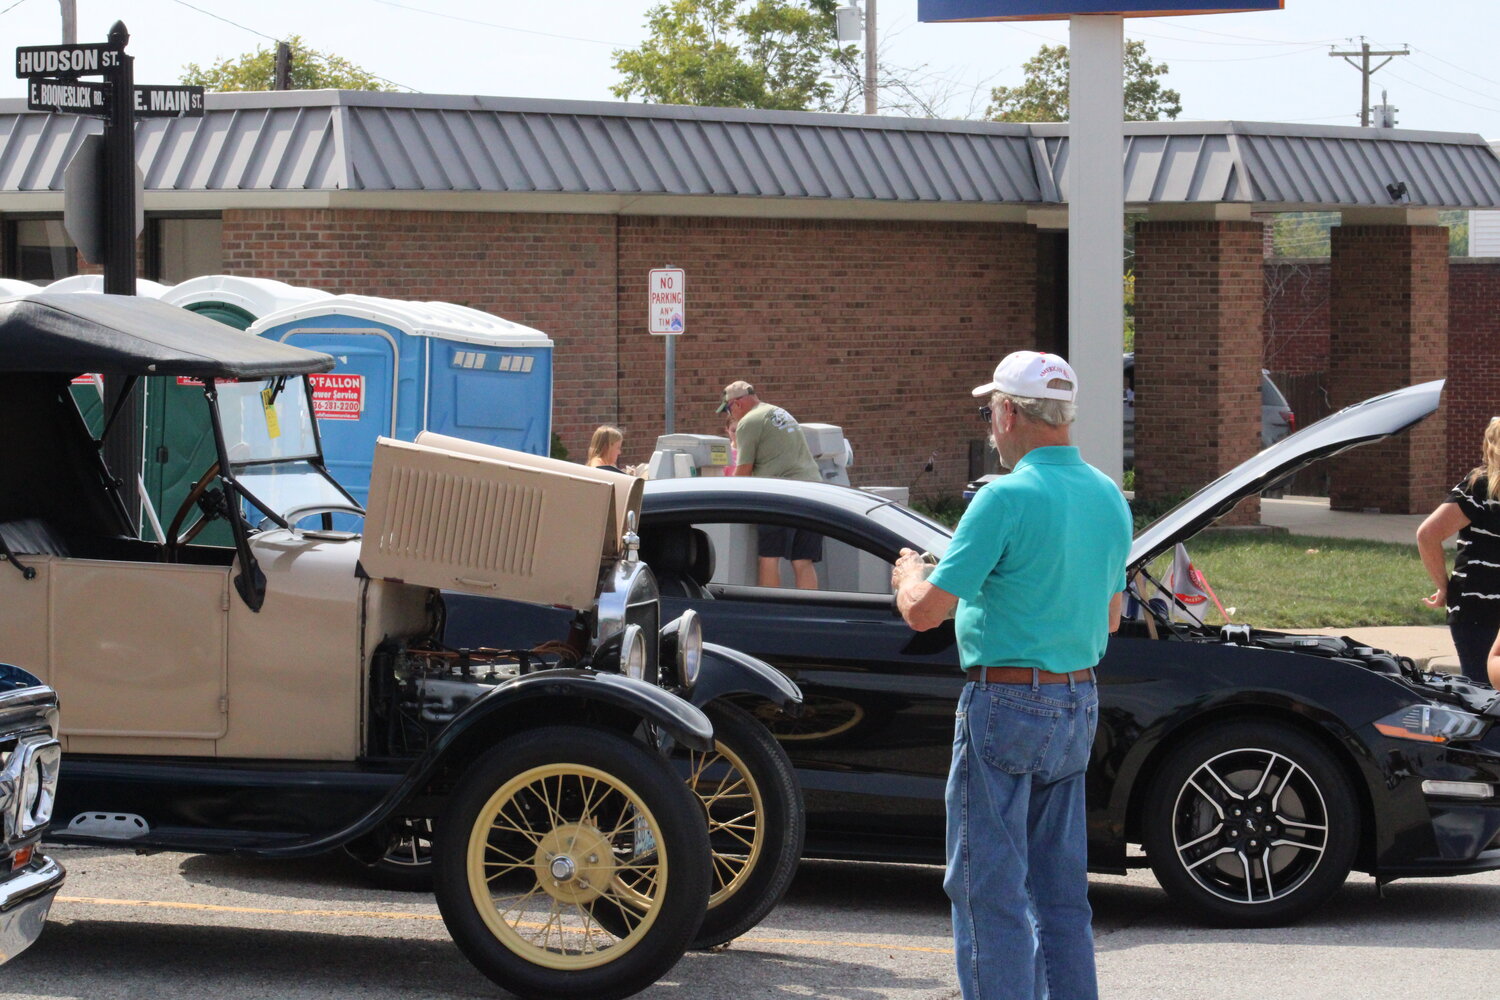 A man checks out one of the cars at the car show.